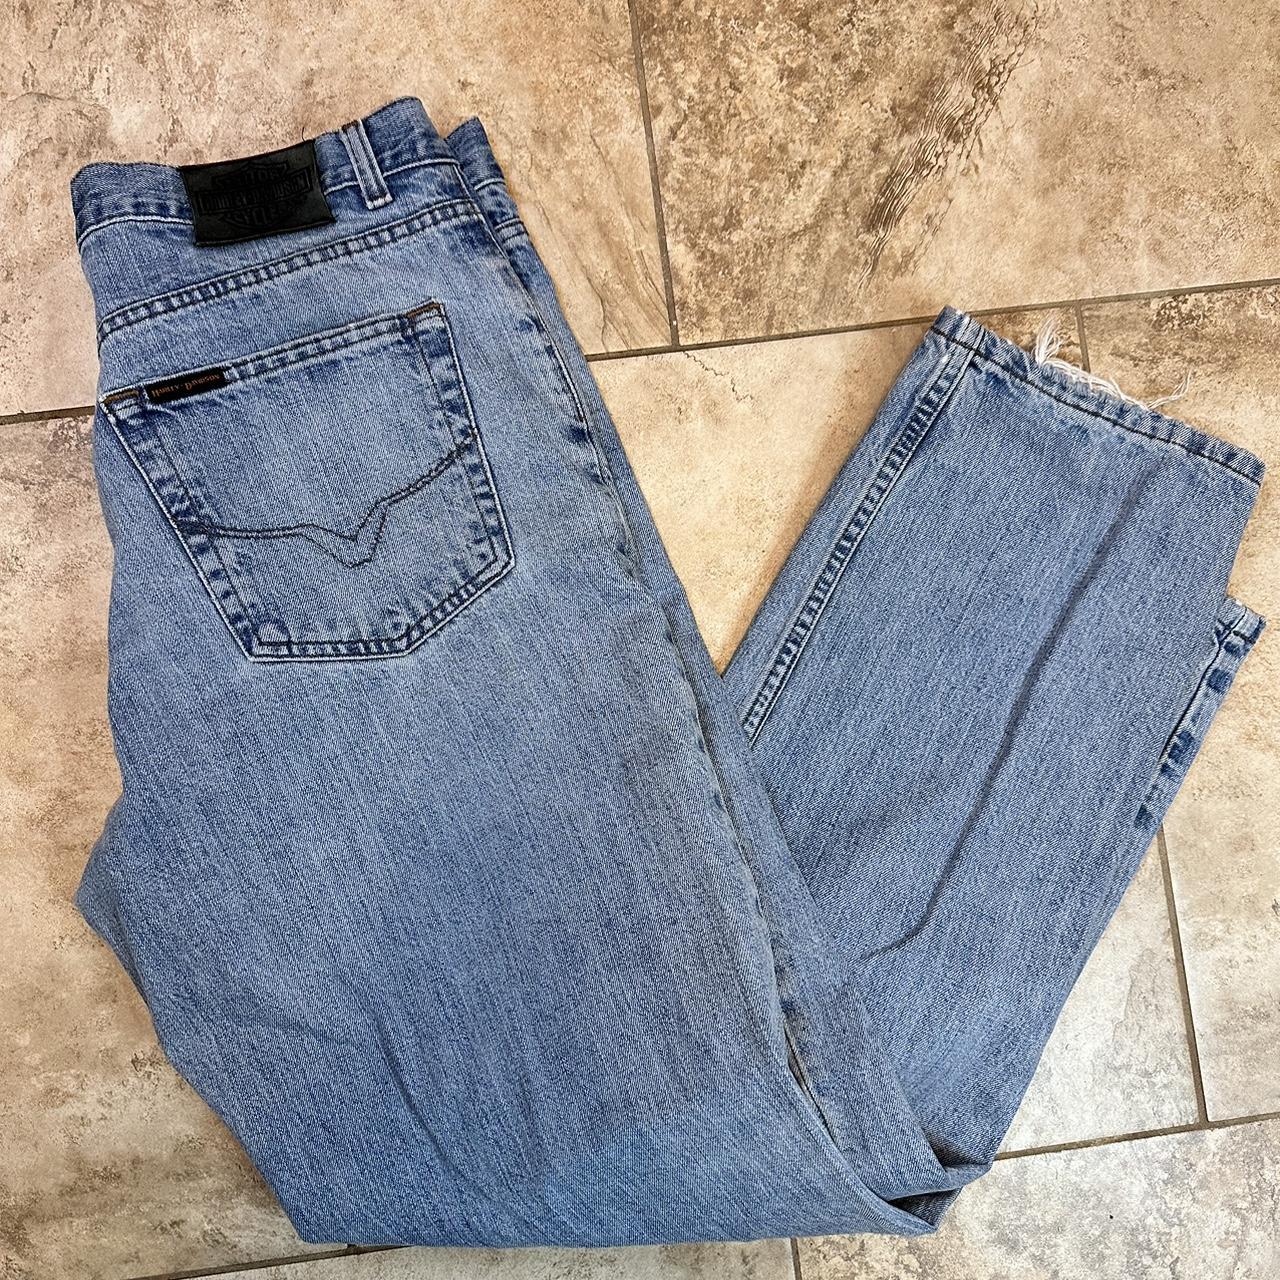 Harley Davidson jeans 36x32 Have been sewn by the... - Depop